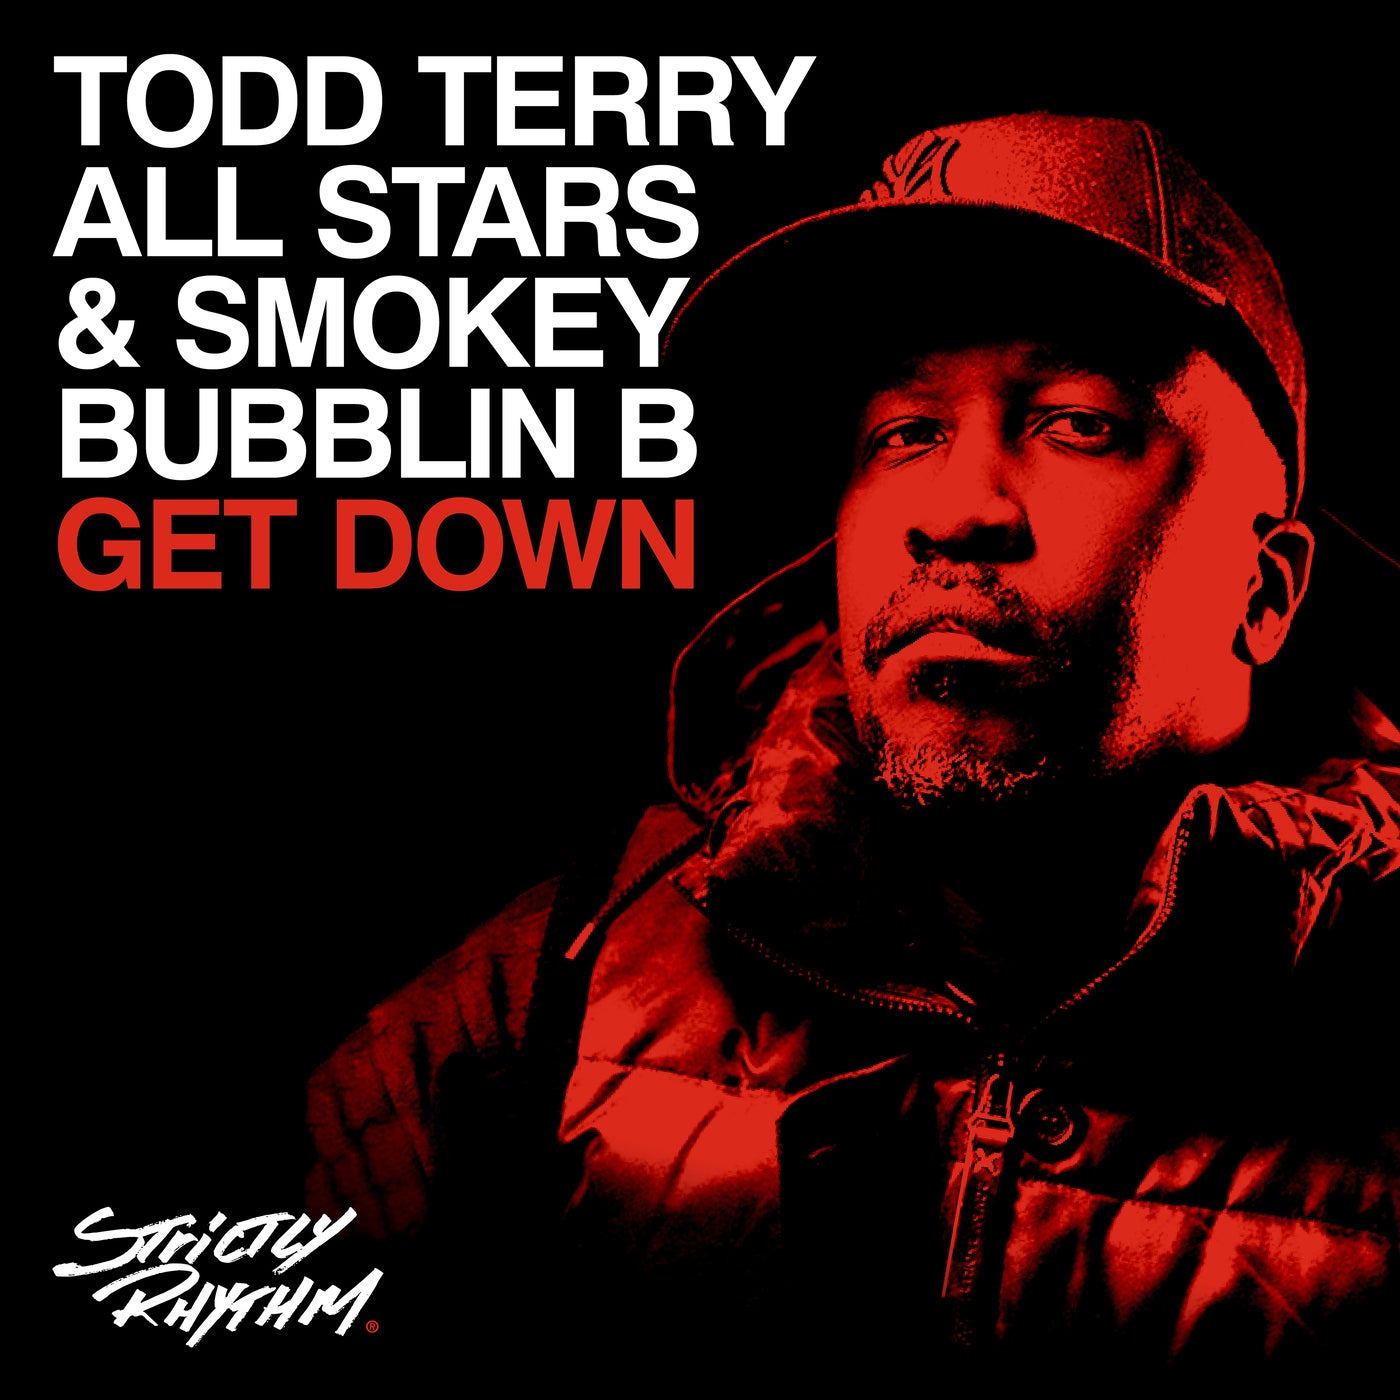 image cover: Todd Terry, Todd Terry All Stars, Smokey Bubblin B - Get Down on Strictly Rhythm